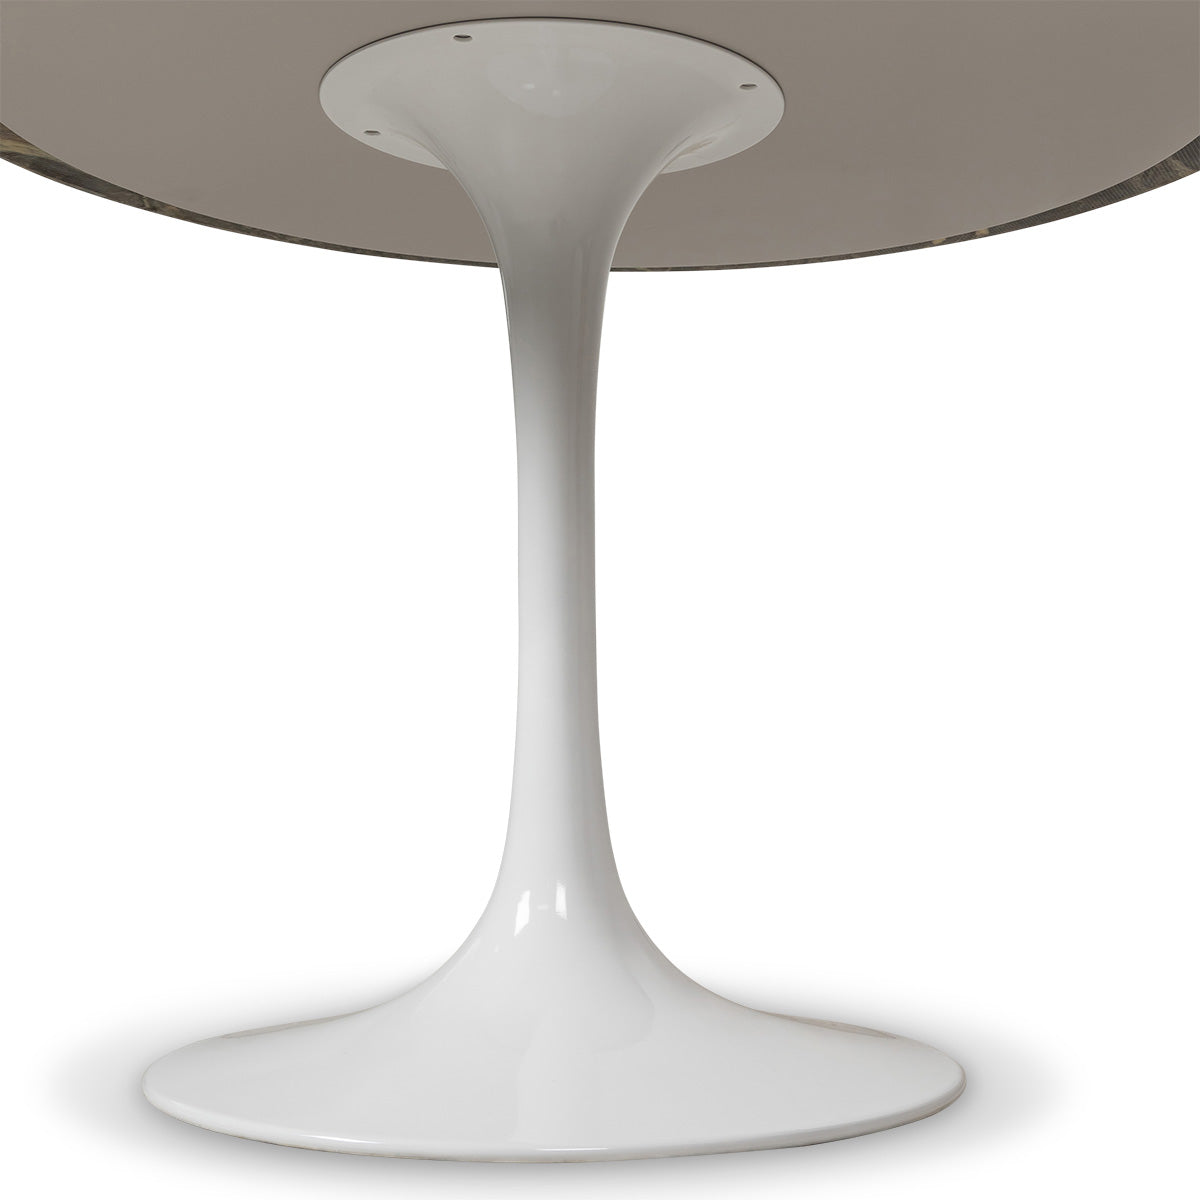 Tulip Round Dining Table with Marble Top